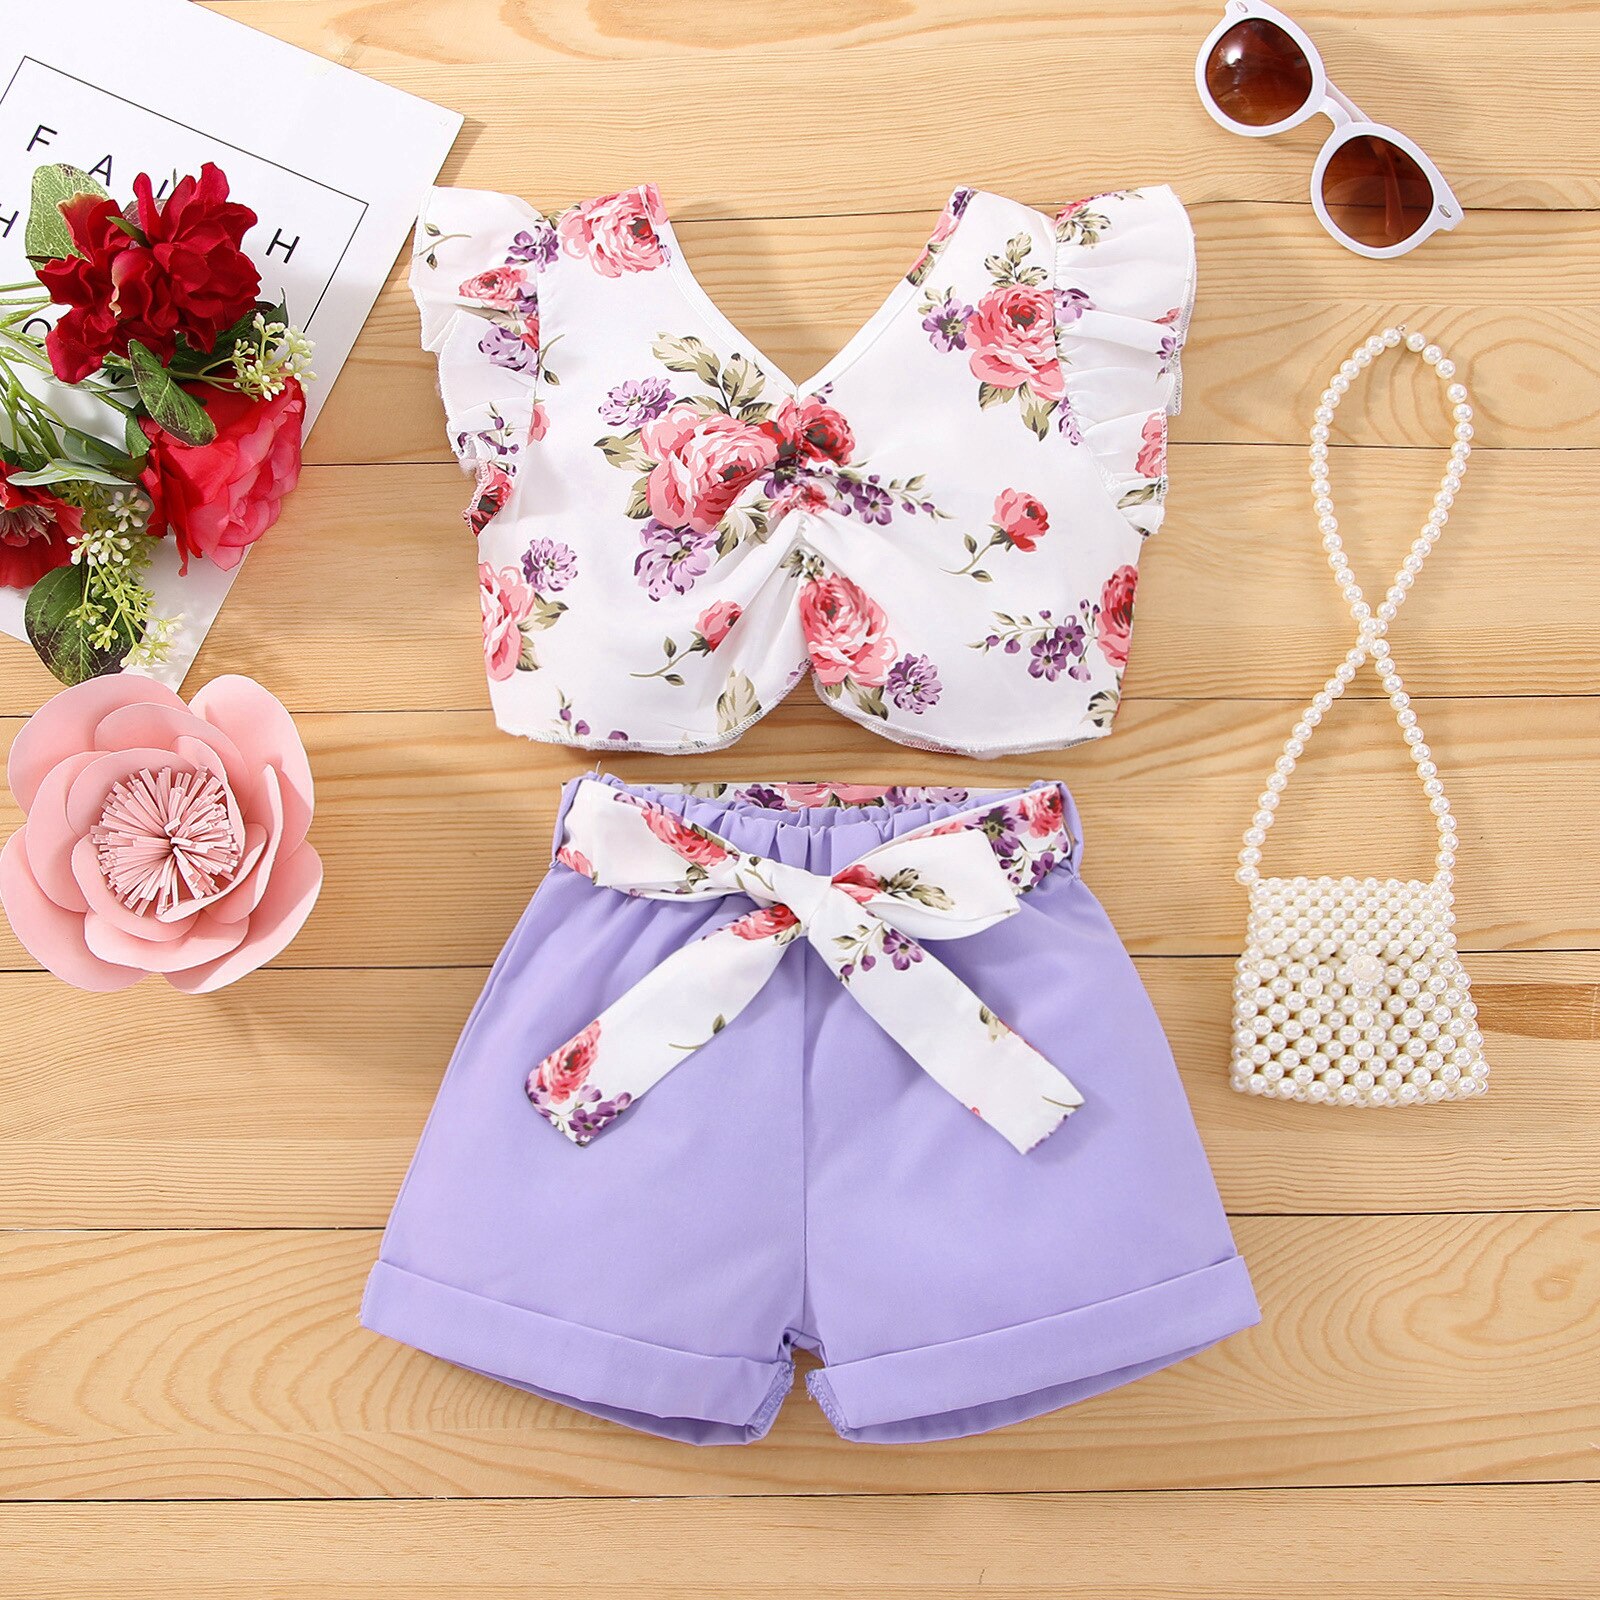 Summer-Newborn-Baby-Girl-Clothes-Set-Children-s-Floral-Short-Sleeve-Top-Shorts-Kid-Outfits-Sets-1